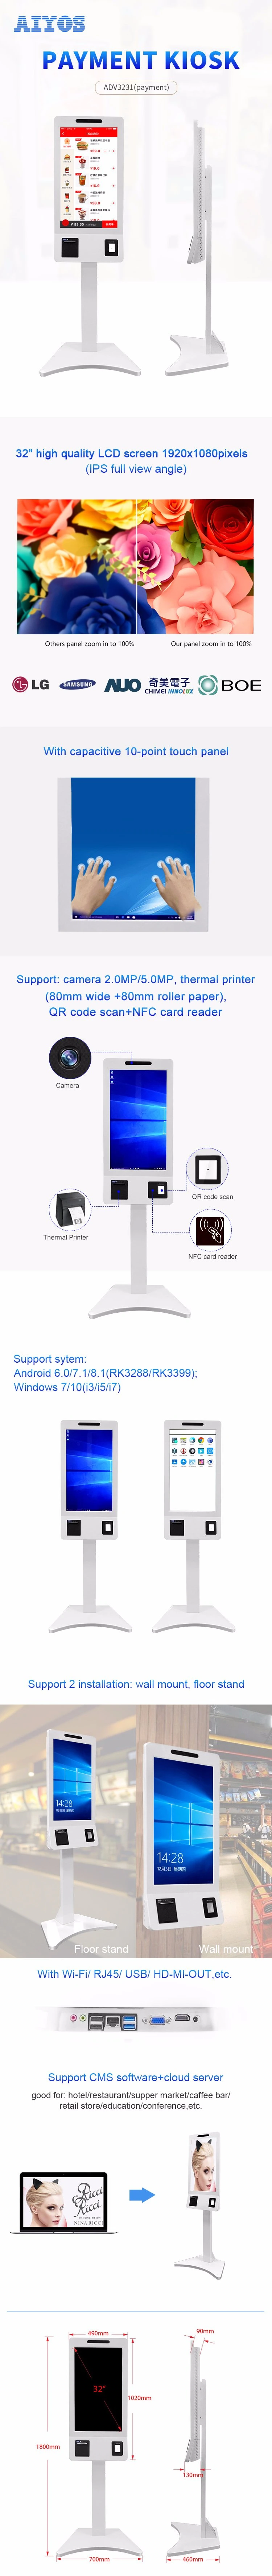 2019 New Hot Selling 32 Inch Payment Kiosk All in One Self Service Kiosk for Supermarket or Store